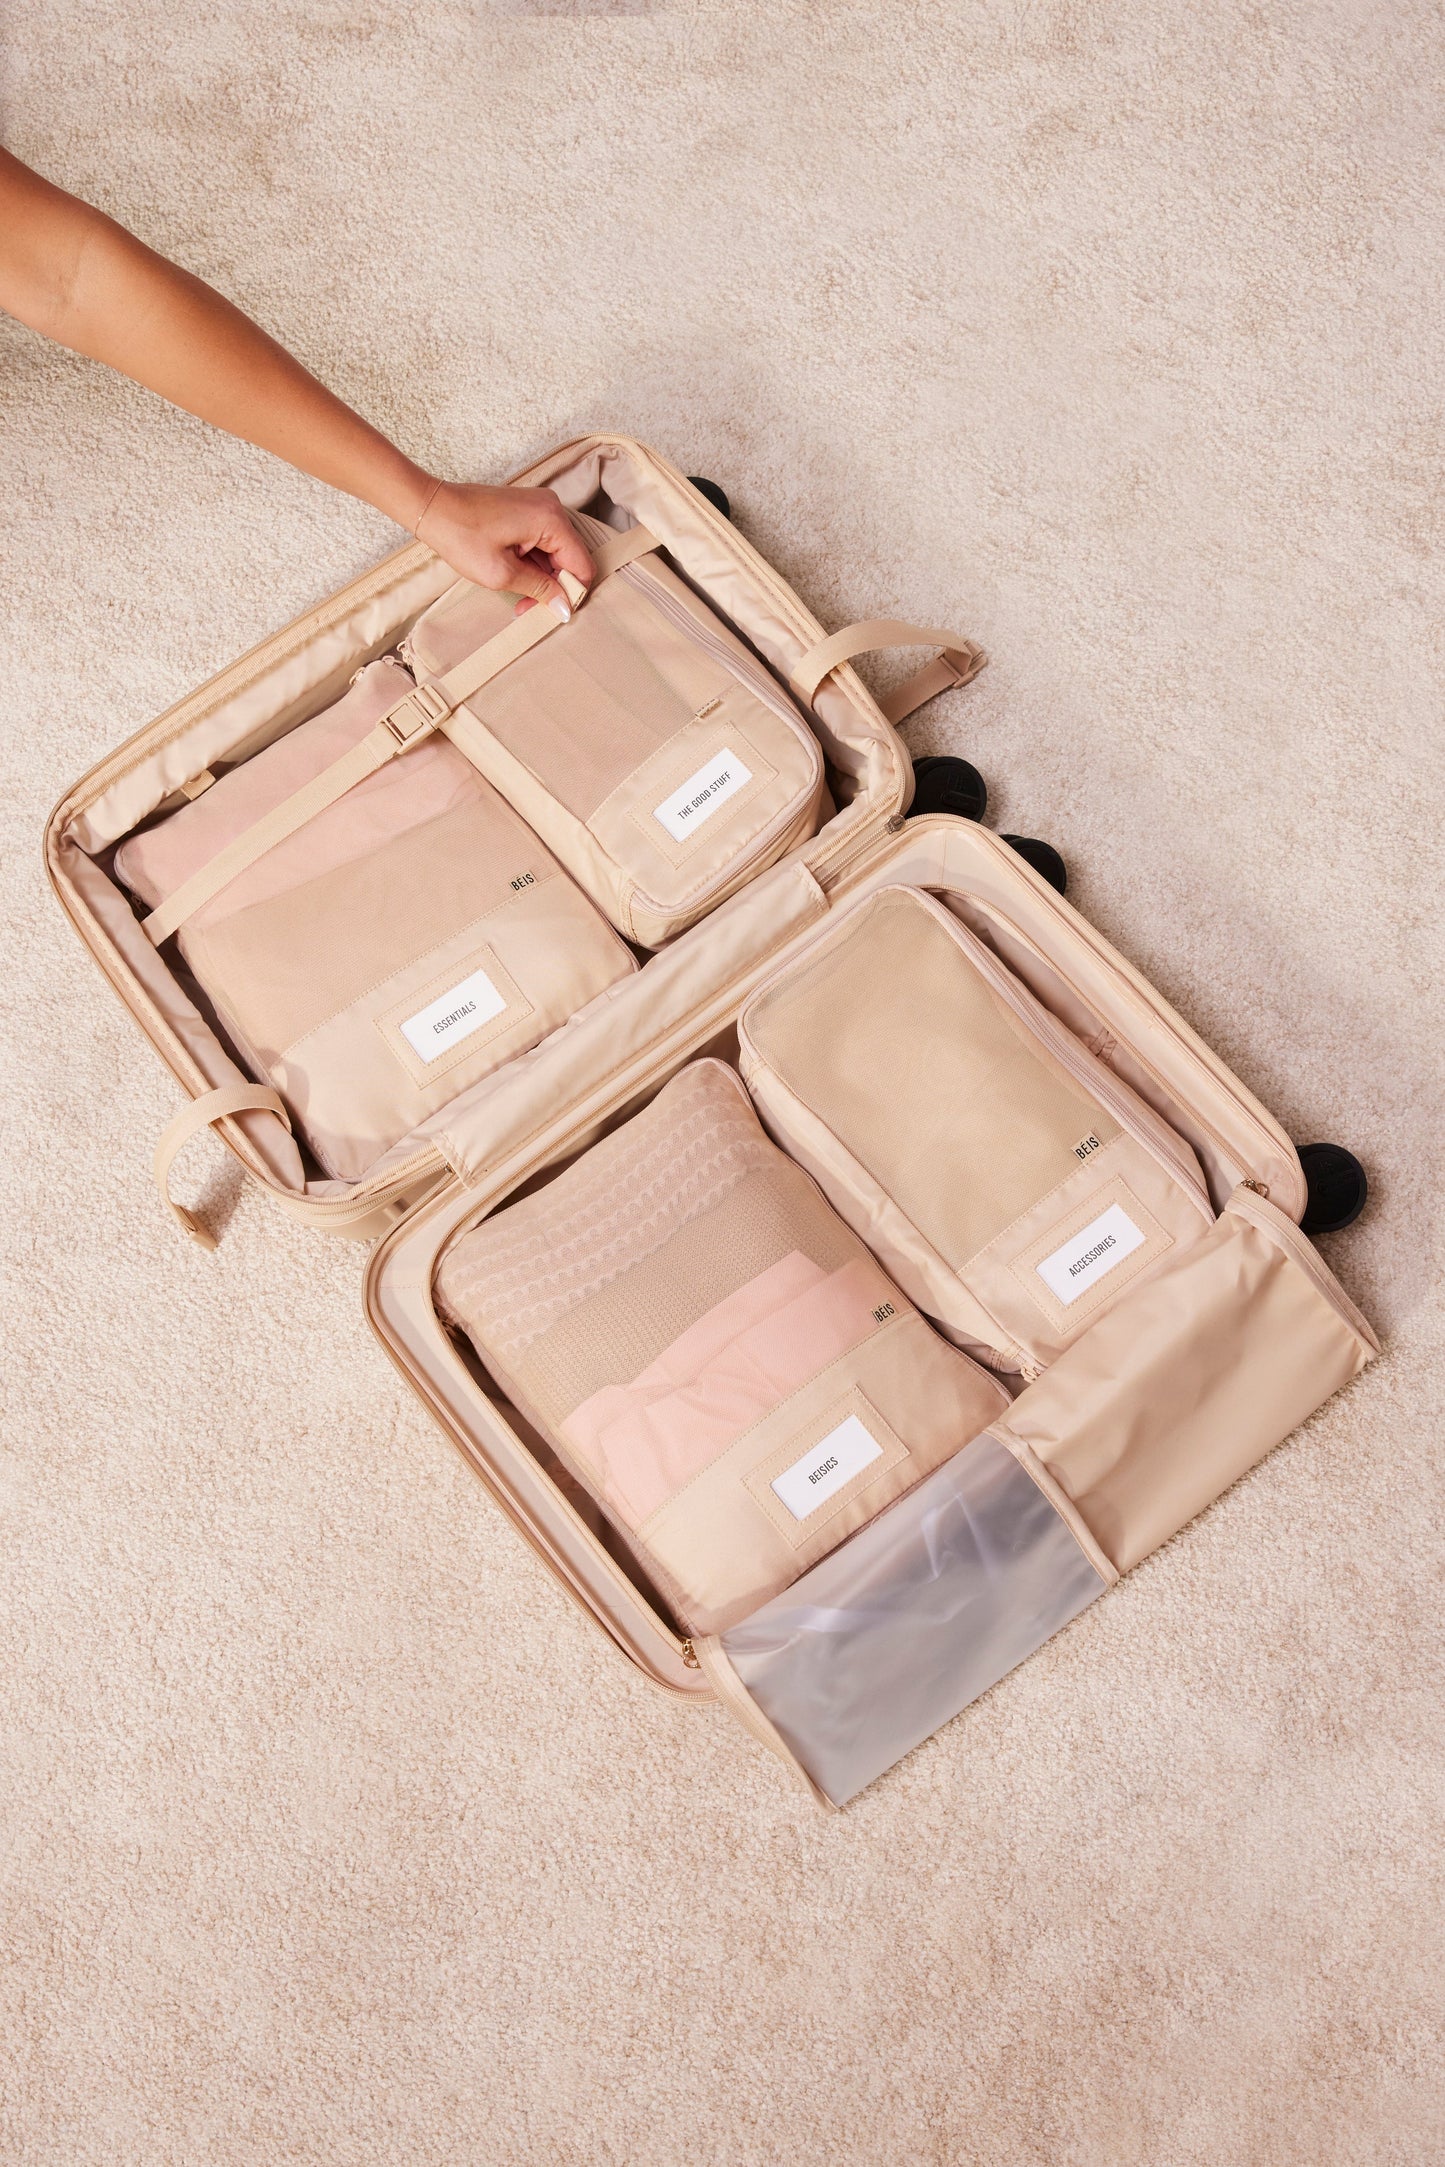 The Compression Packing Cubes 4 pc in Beige